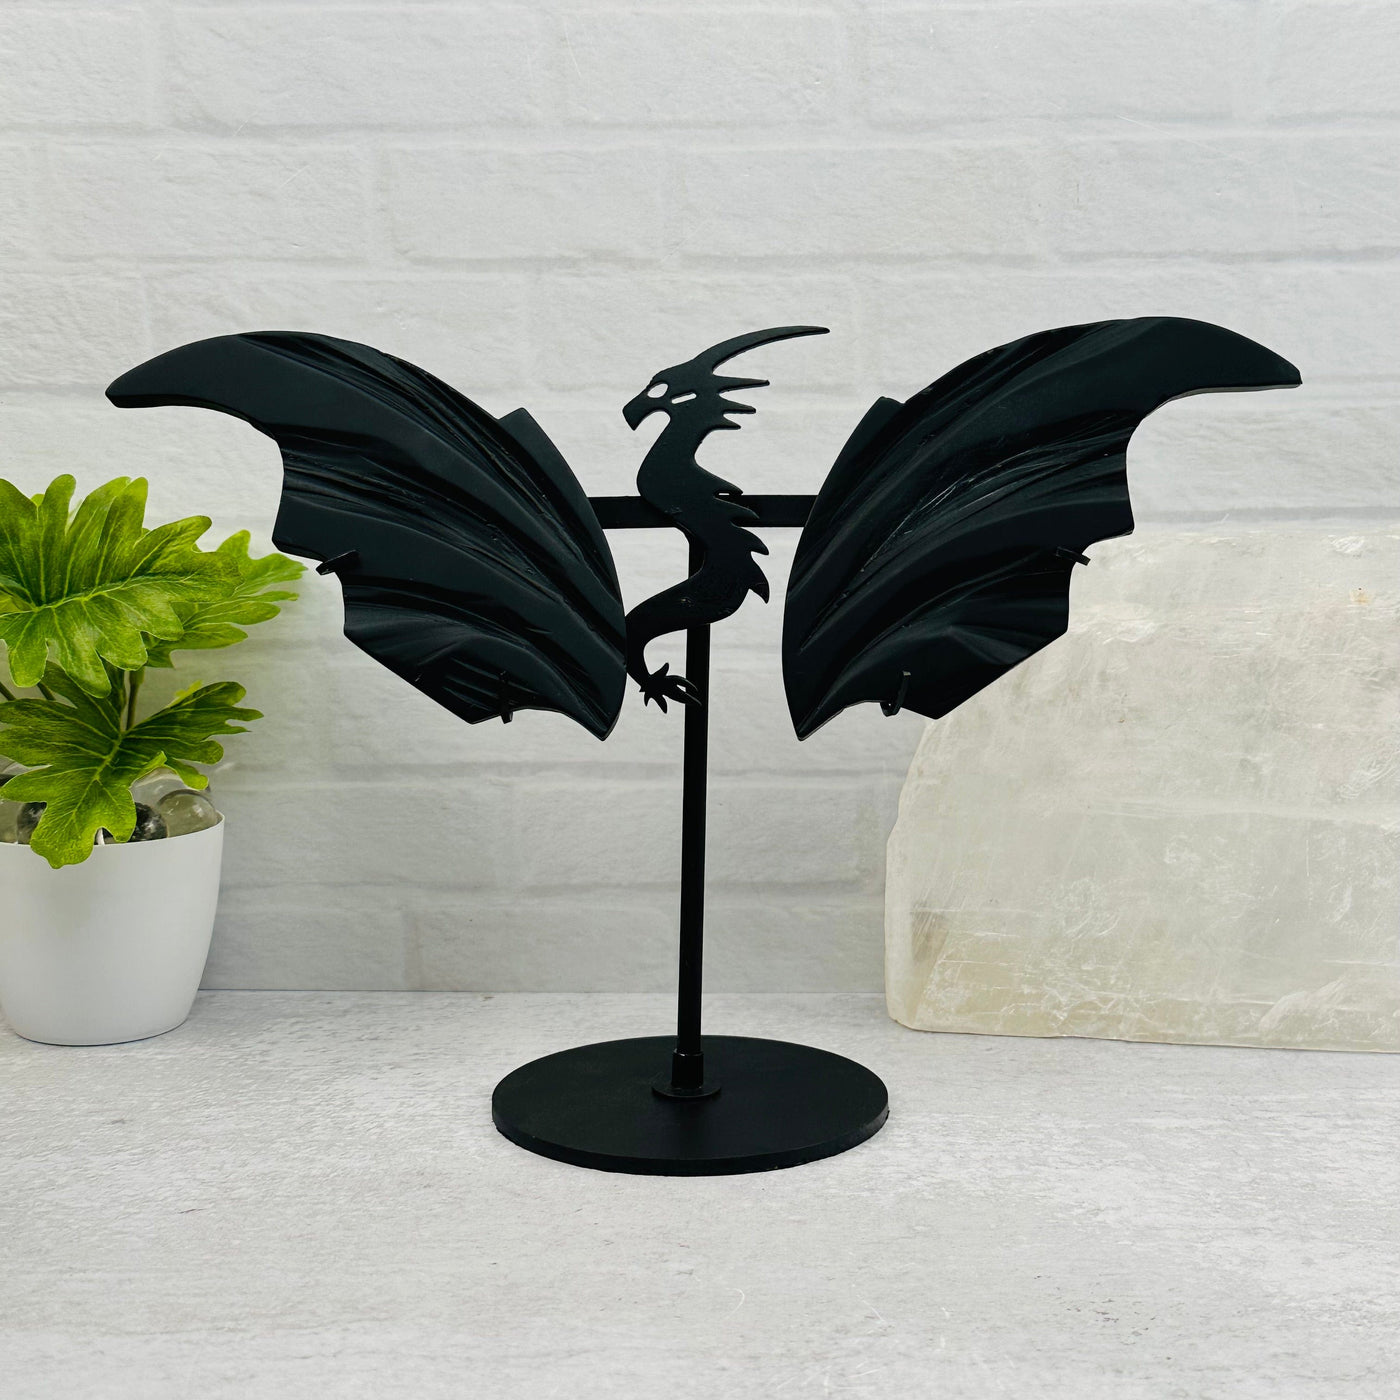 Black Obsidian Dragon on Stand displayed as home decor 